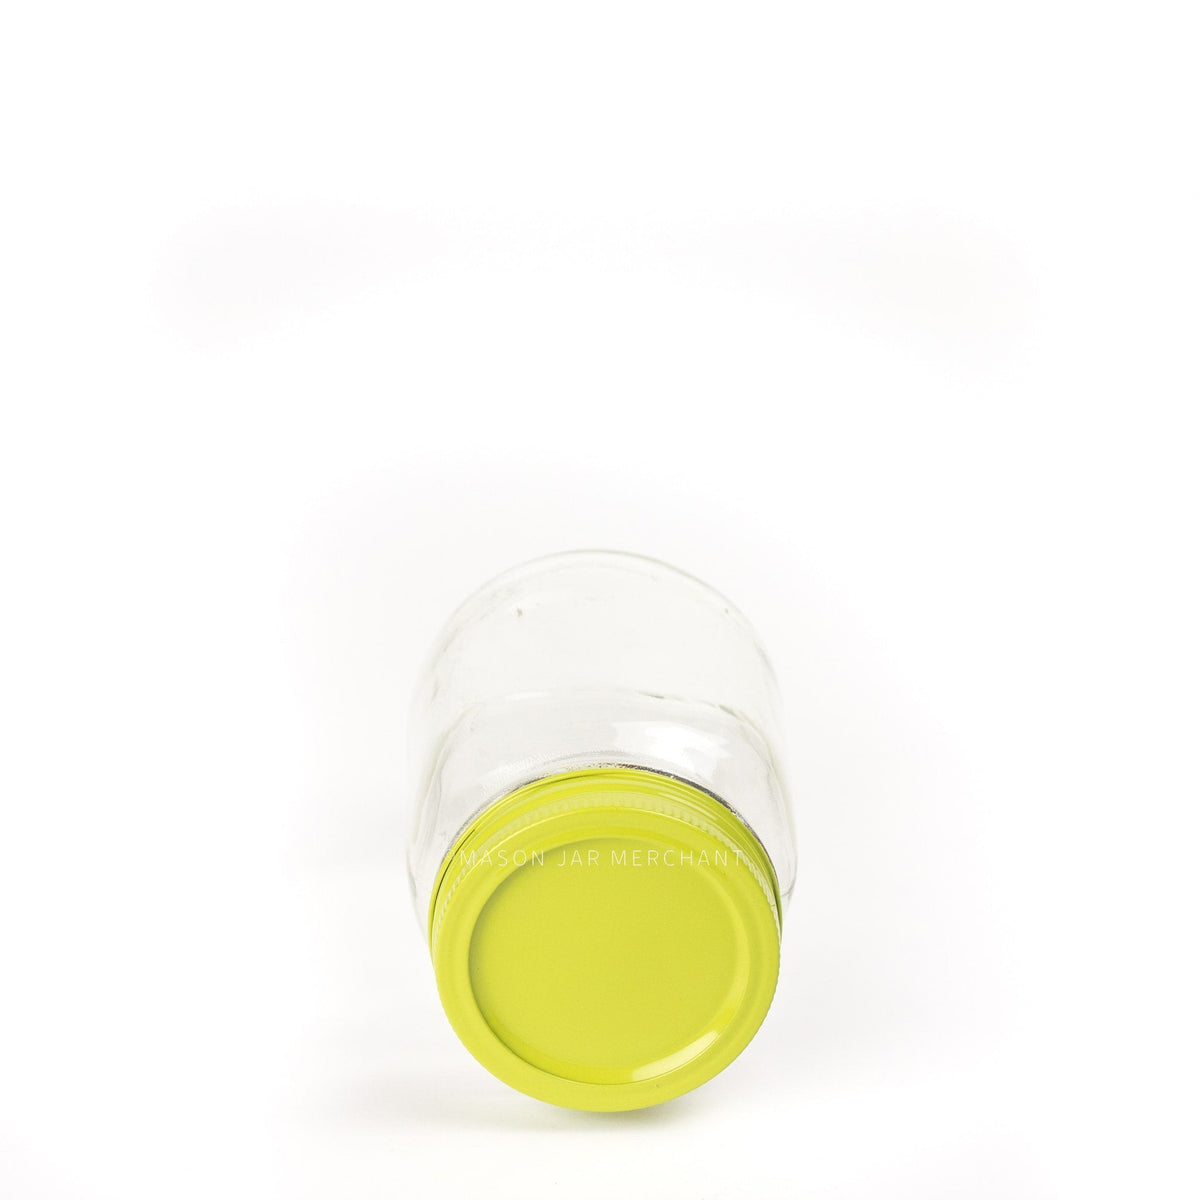 A lime green painted lid on a regular mouth jar